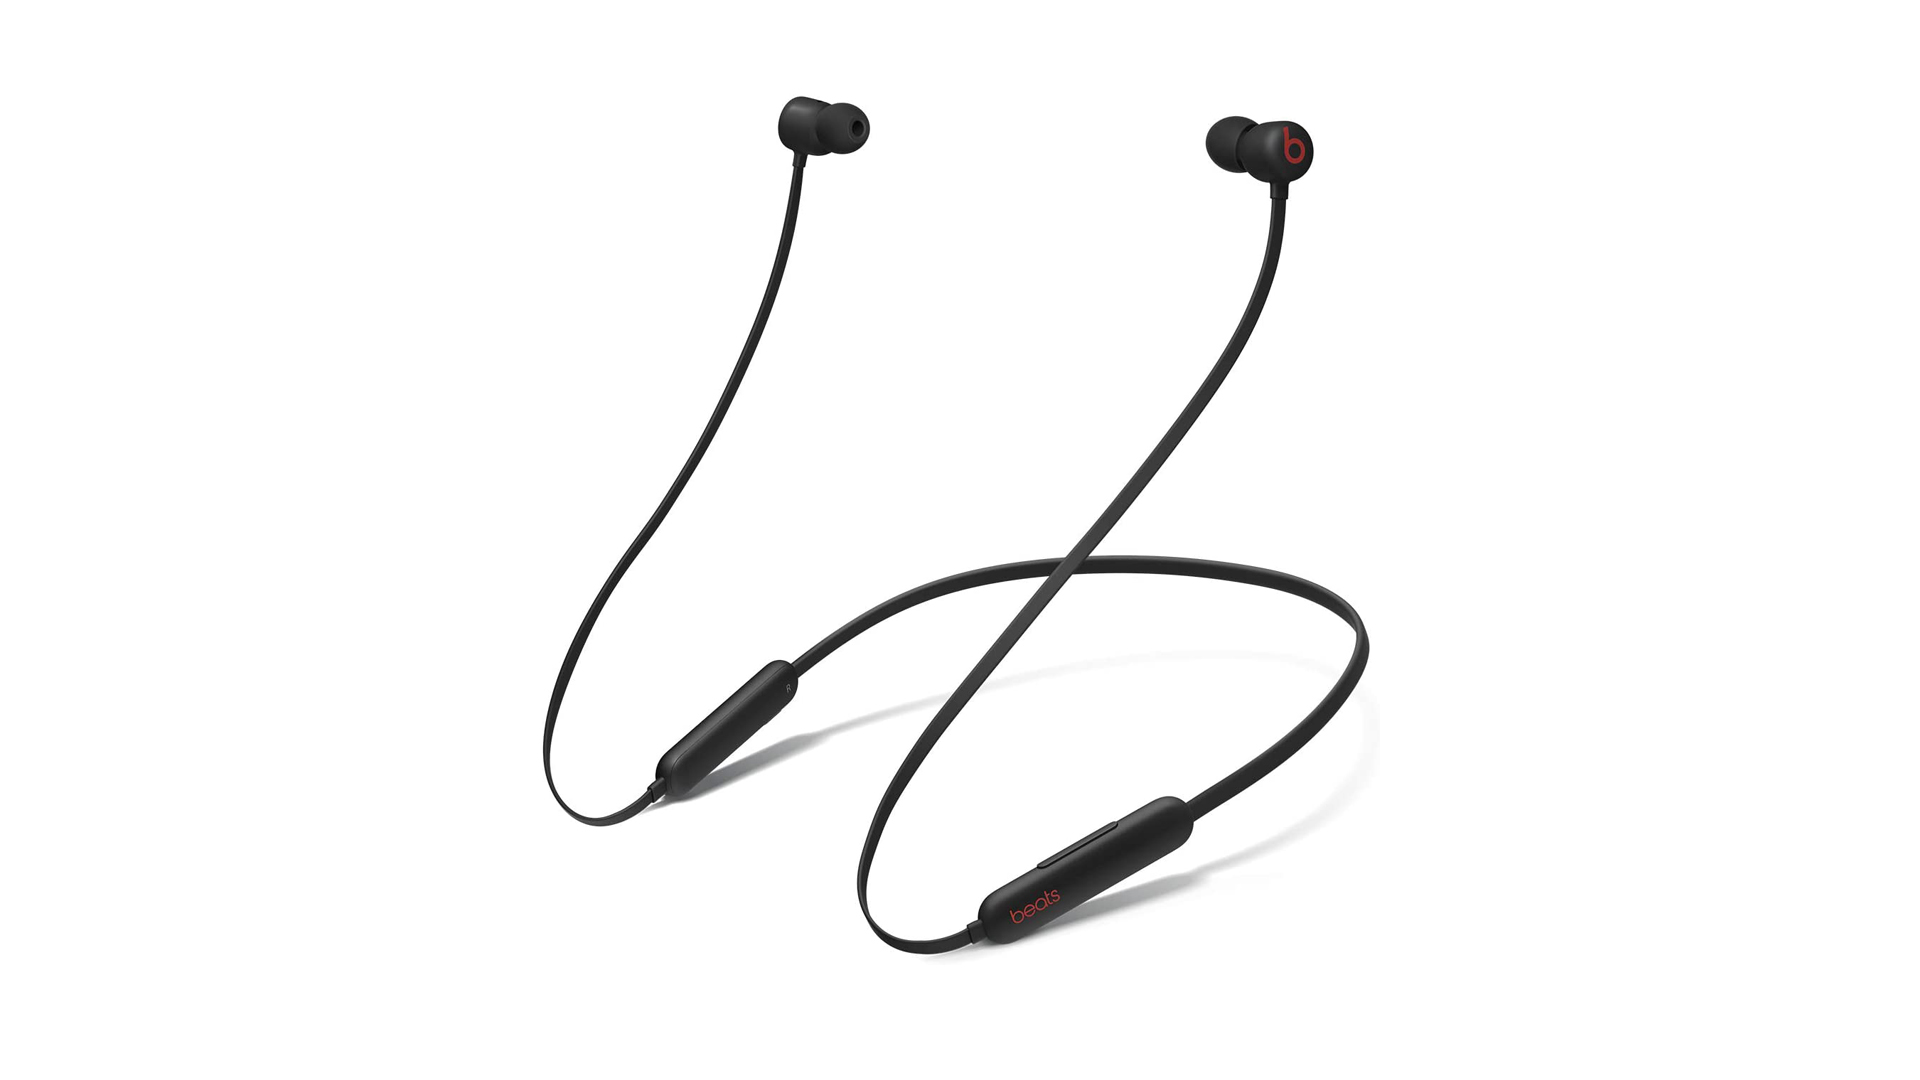 Beats Flex ear buds in black on a white background.